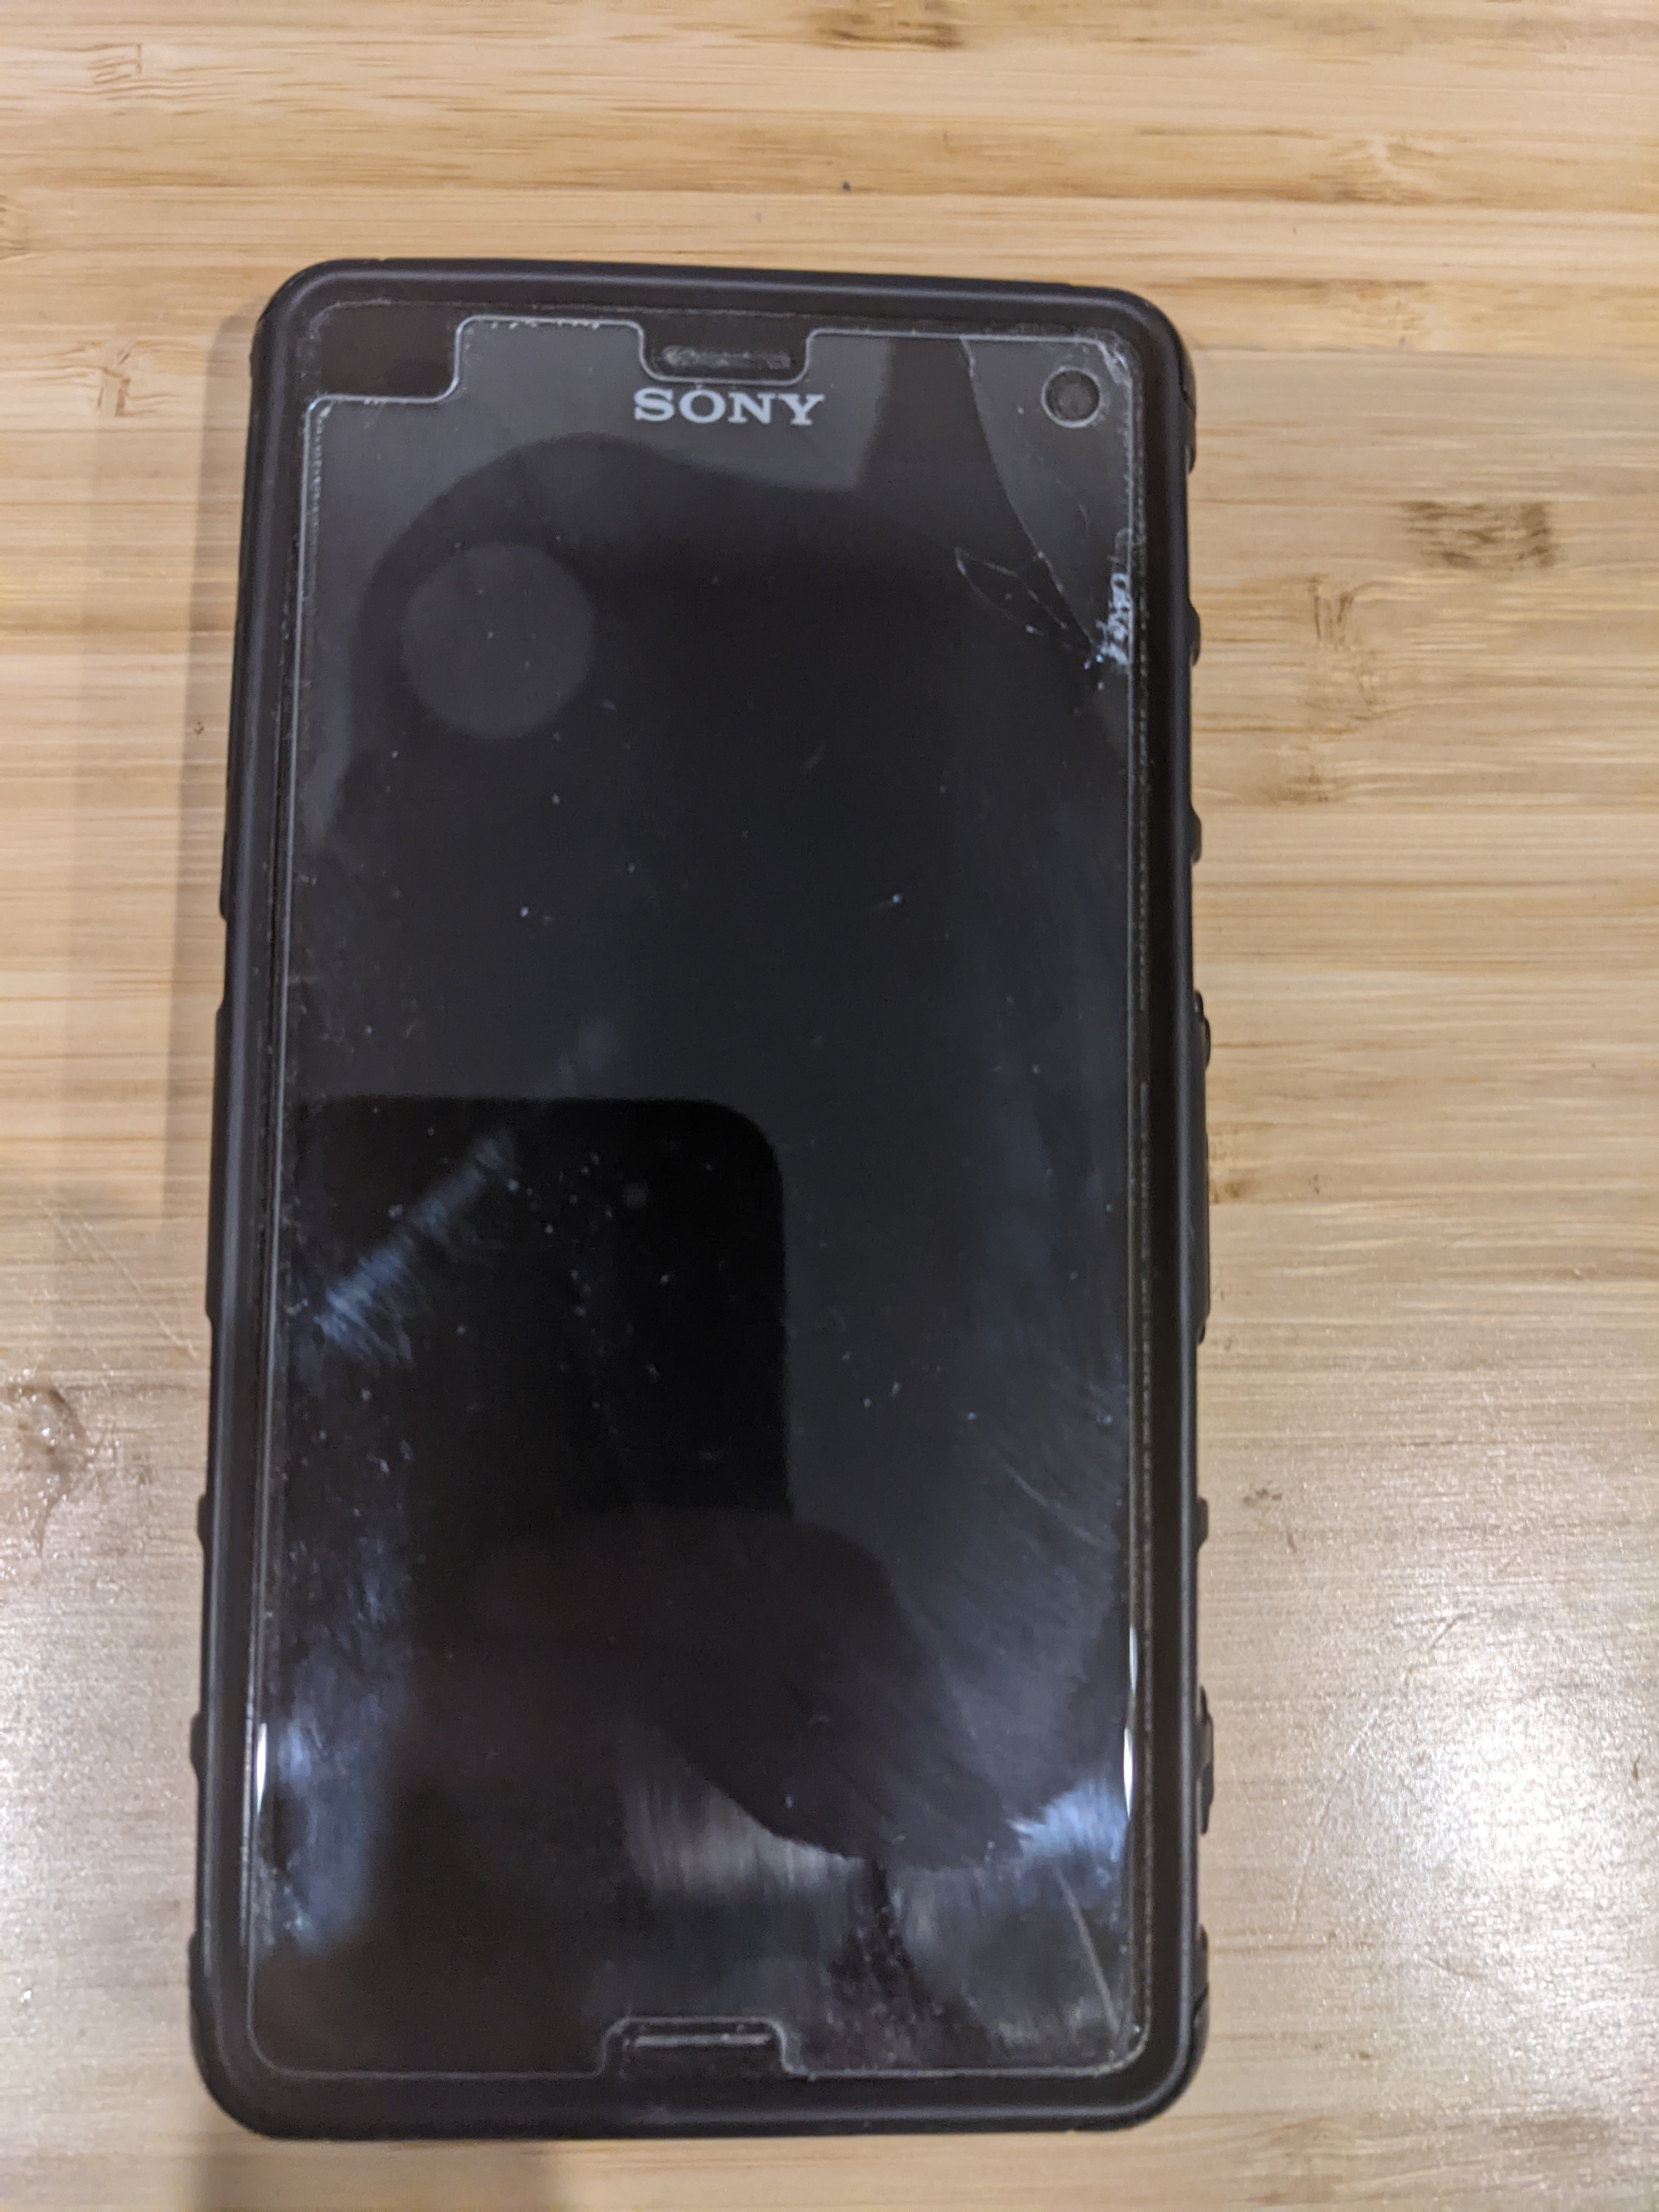 image of Sony Xperia Z3 Compact smartphone